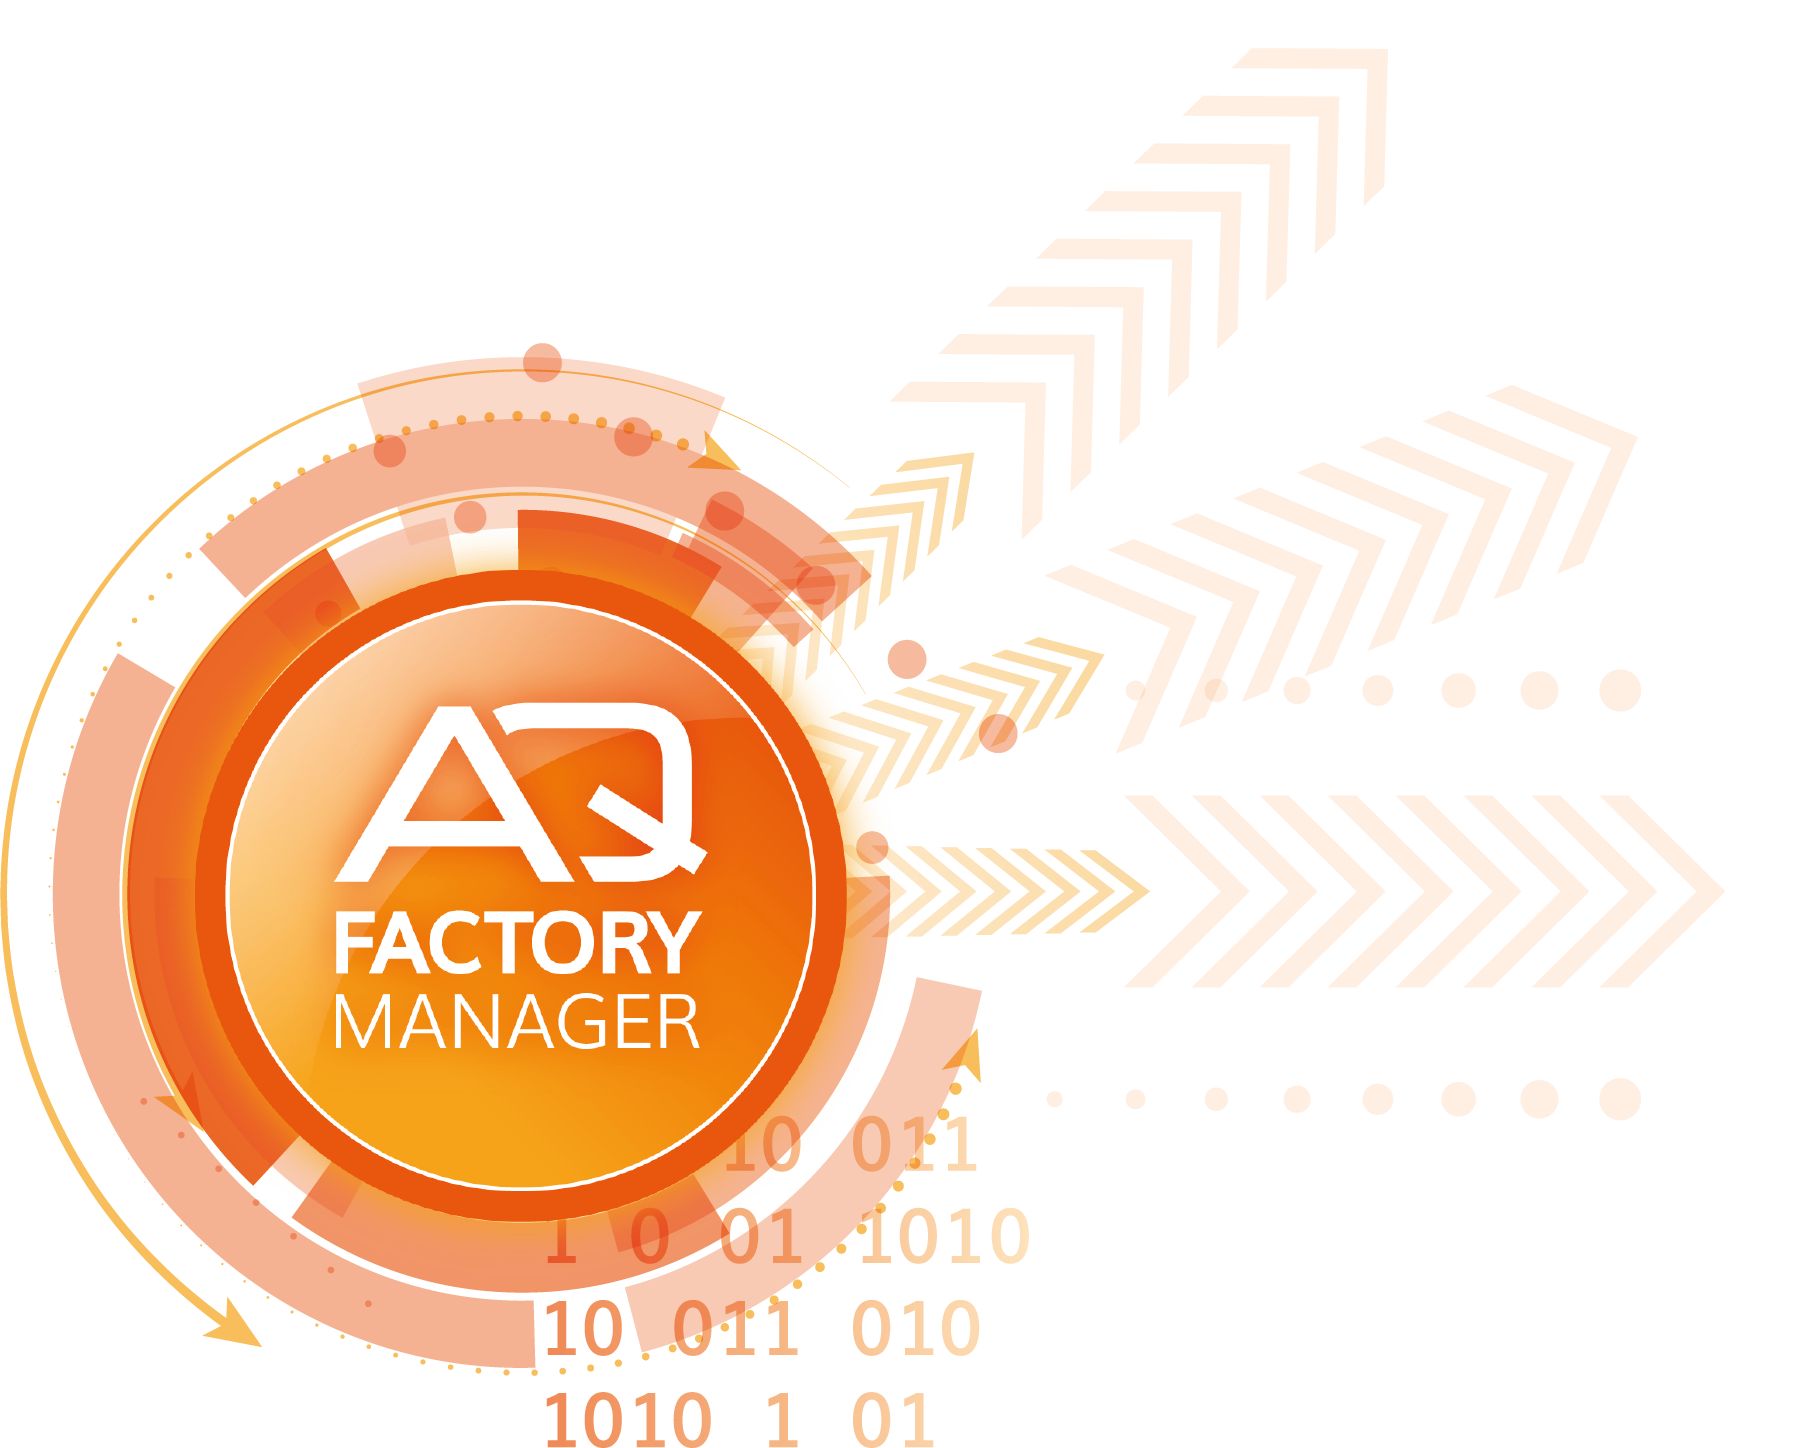 Icon AQ FACTORY MANAGER